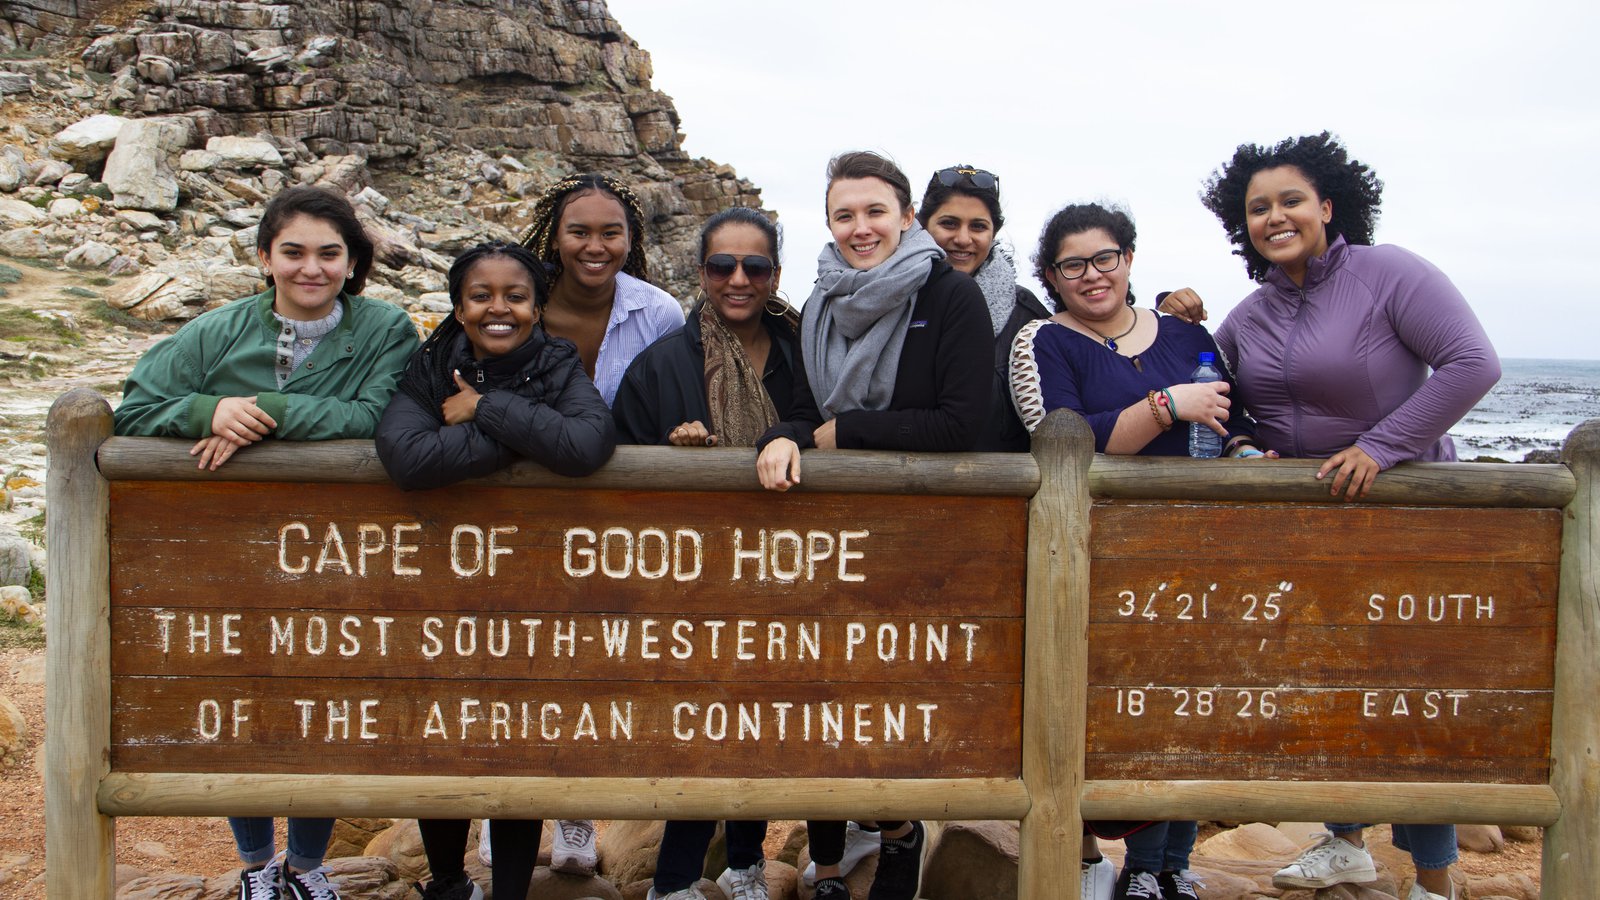 Global Citizen Curtis Fellowship 2022 (Funded trip to New York City)